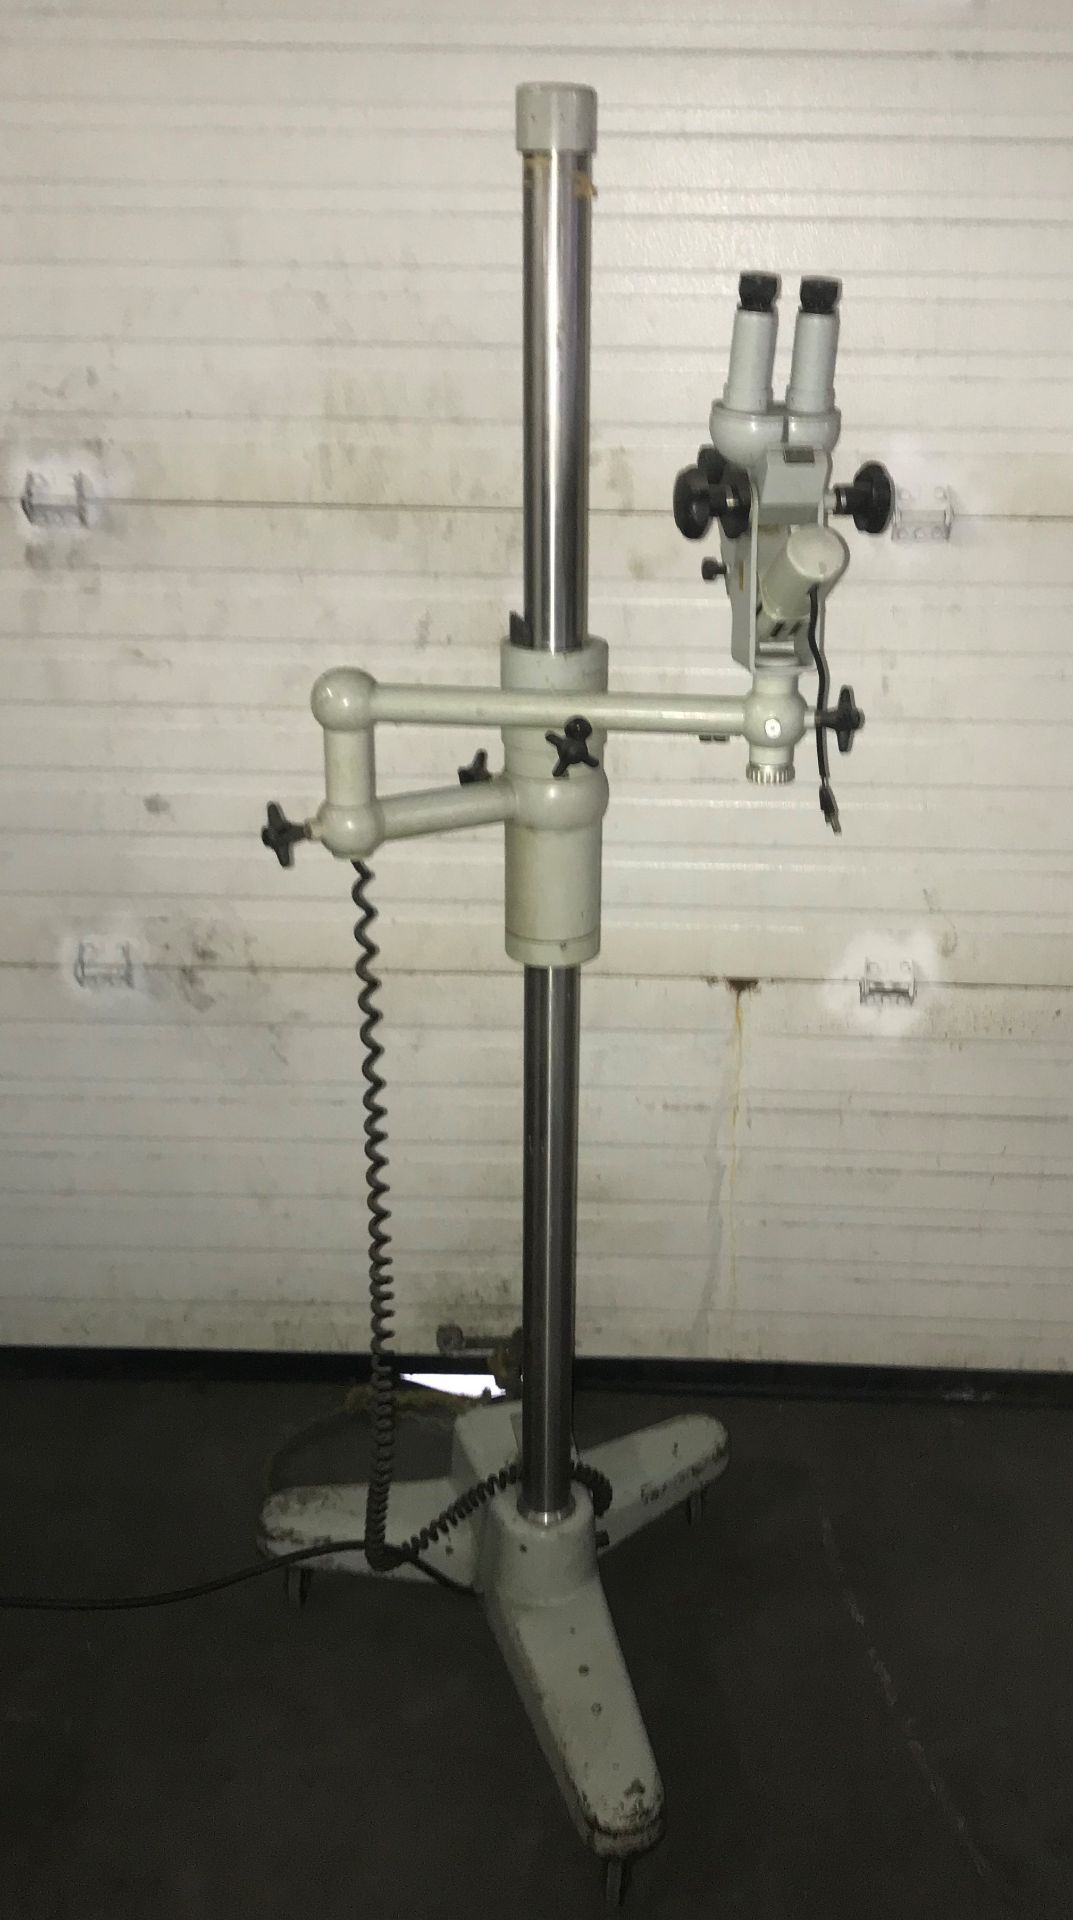 Carl Zeiss Microscope & Stand